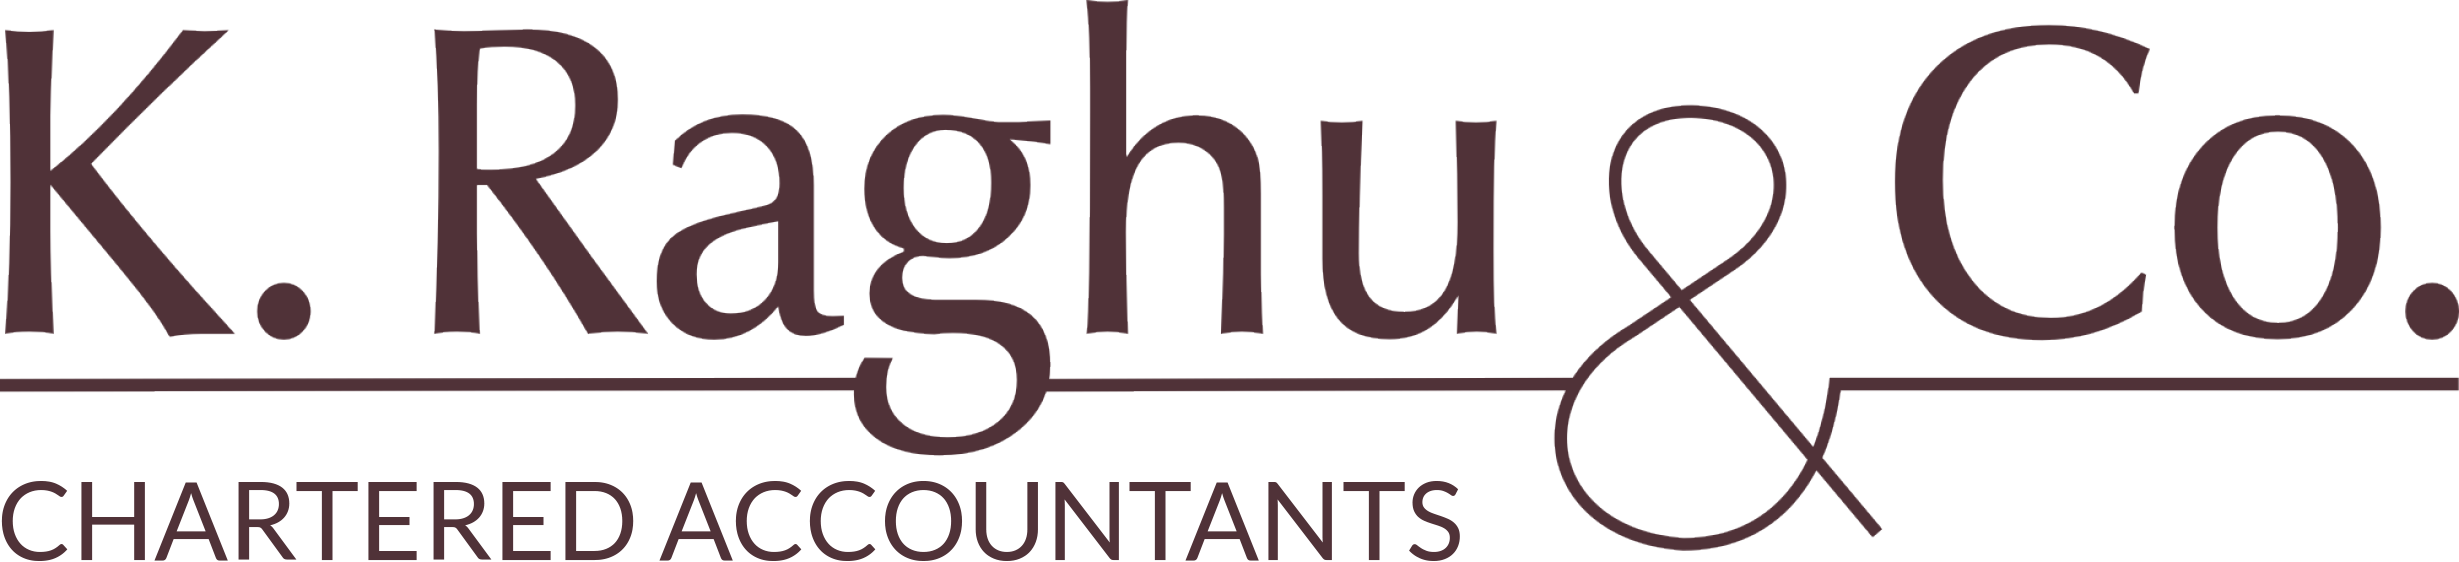 K. Raghu & Co - Chartered Accountants|Architect|Professional Services